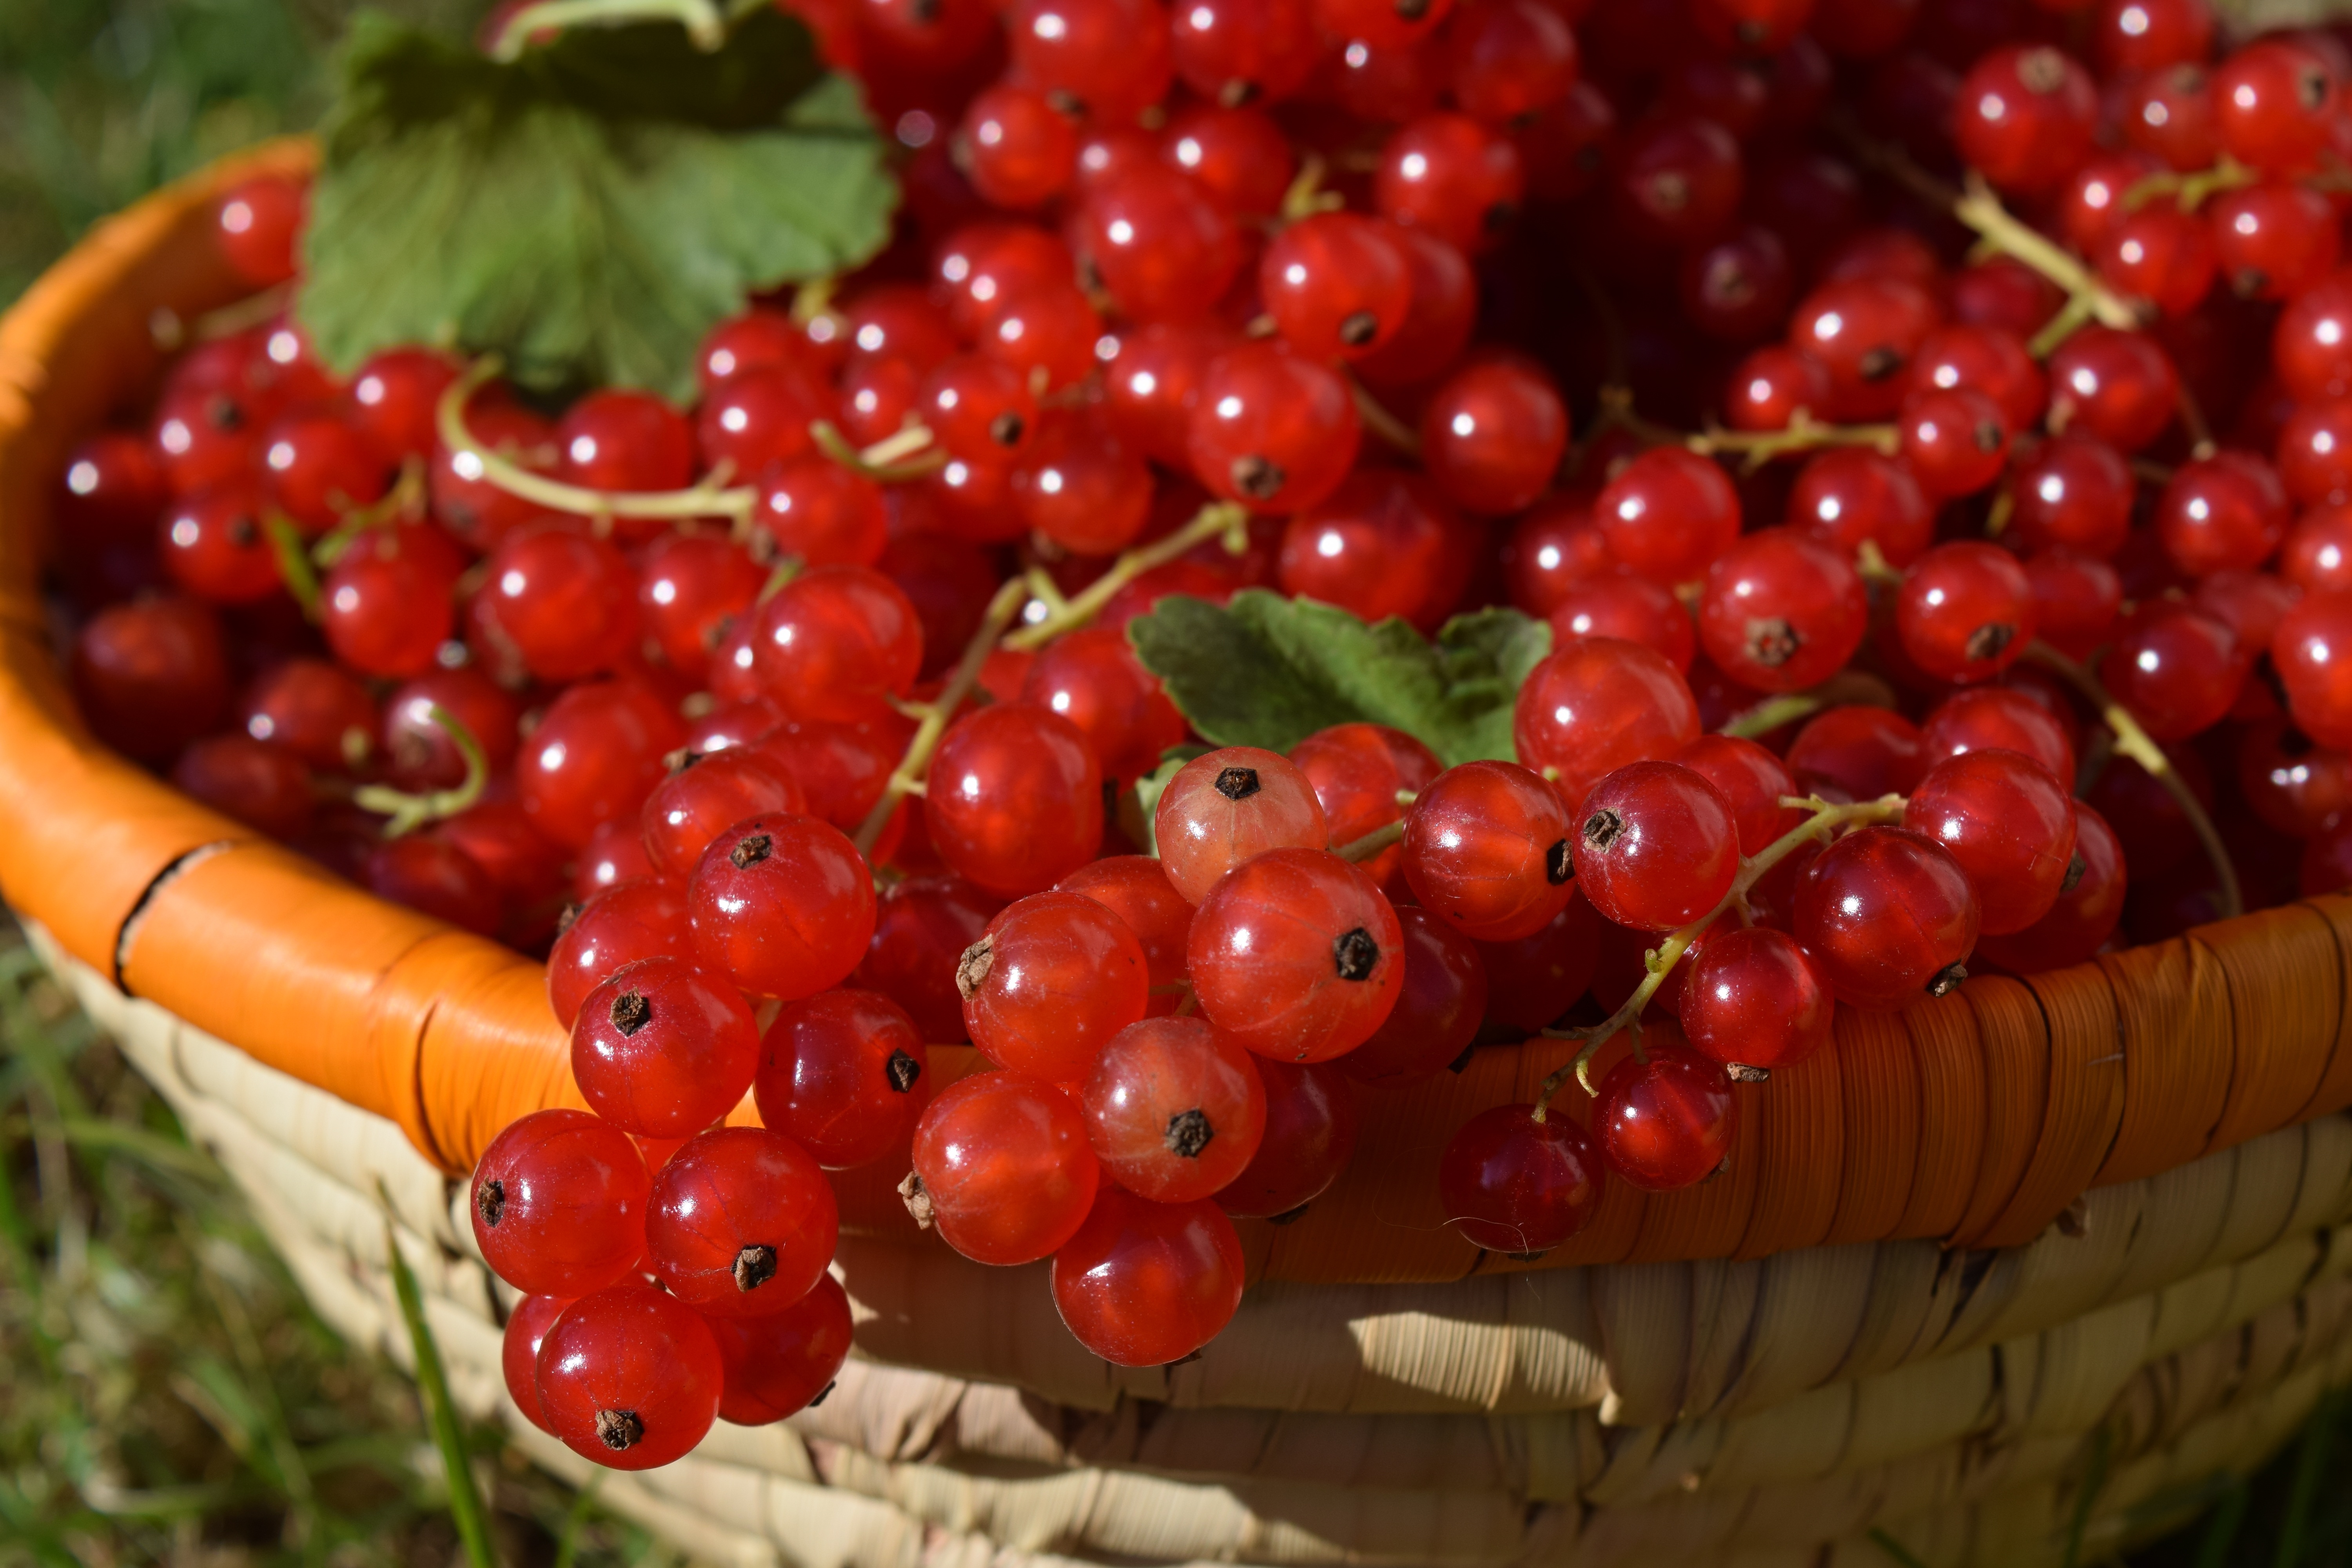 food, berries, currant, basket, ripe, red currants, redcurrant cellphone